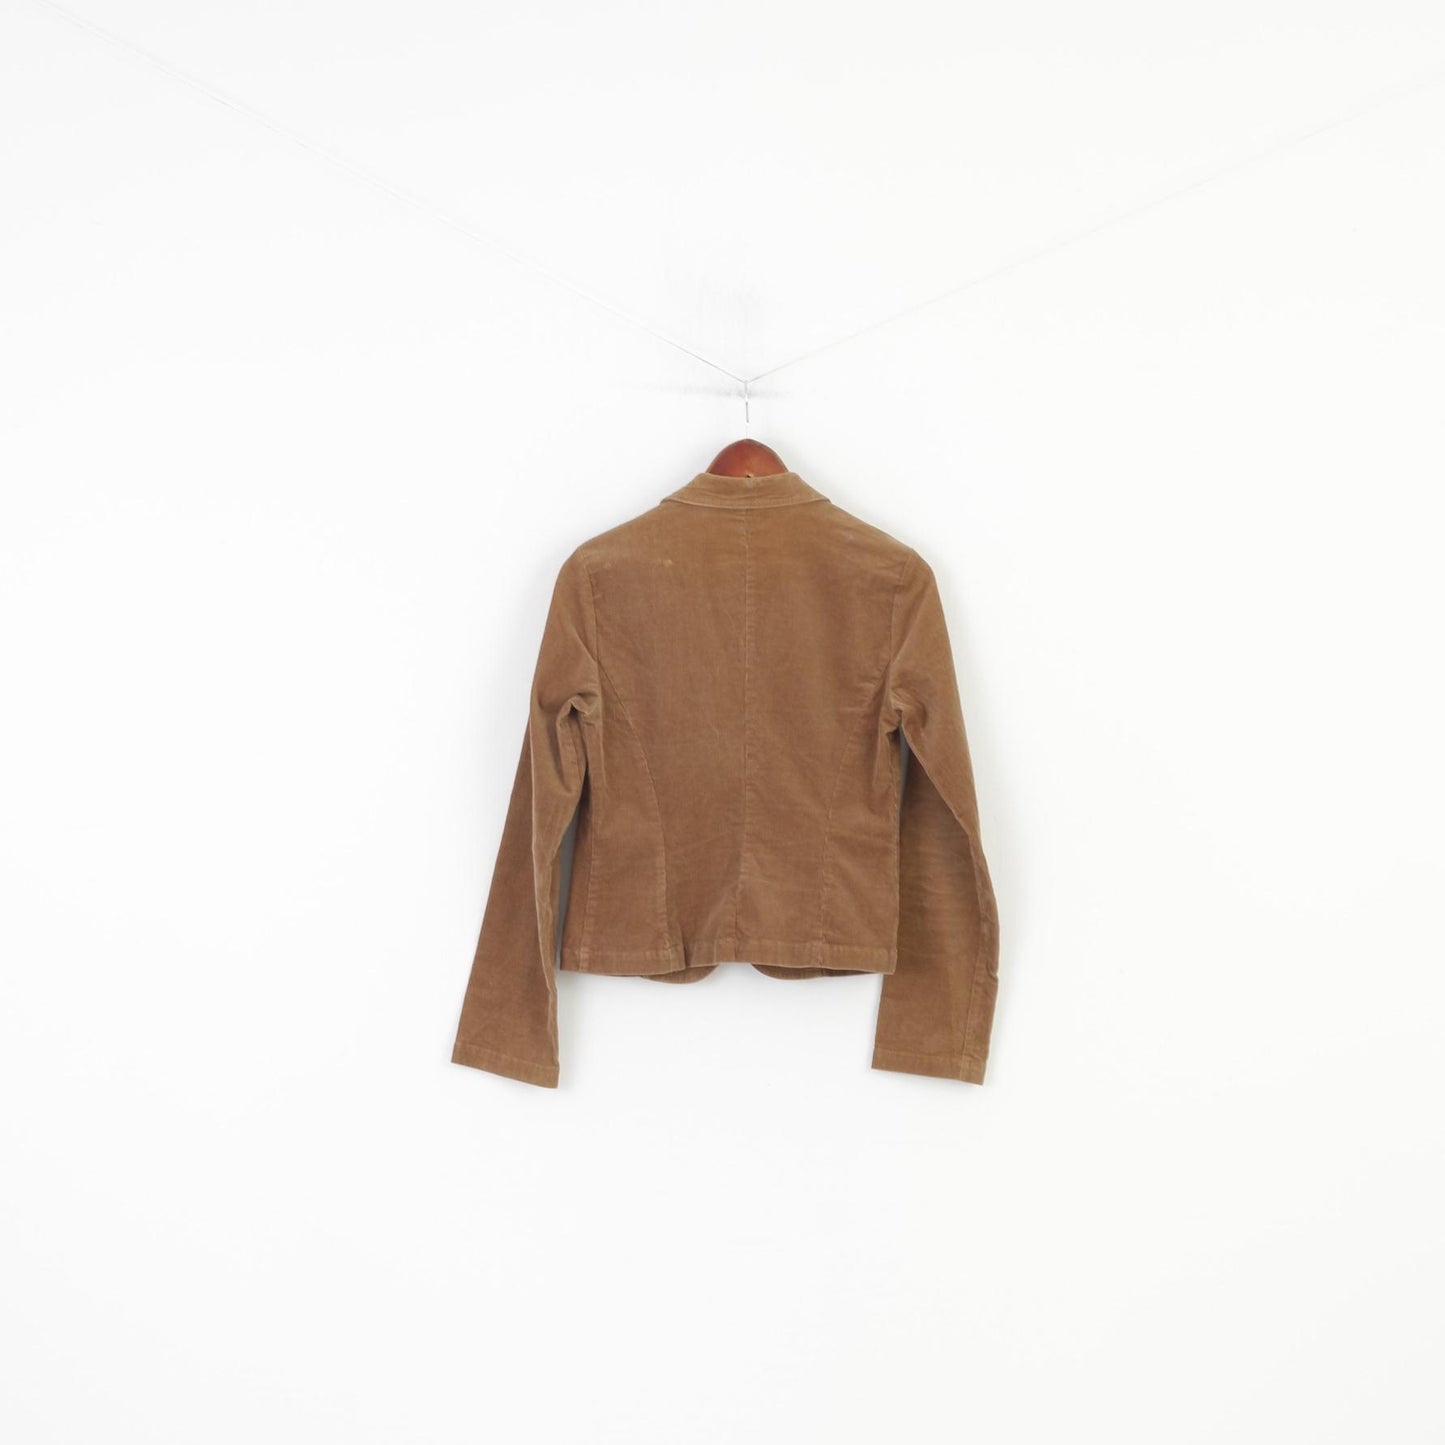 United Colors Of Benetton Women 44 S Jacket Brown Corduroy Cotton Blazer Breasted Vintage Top